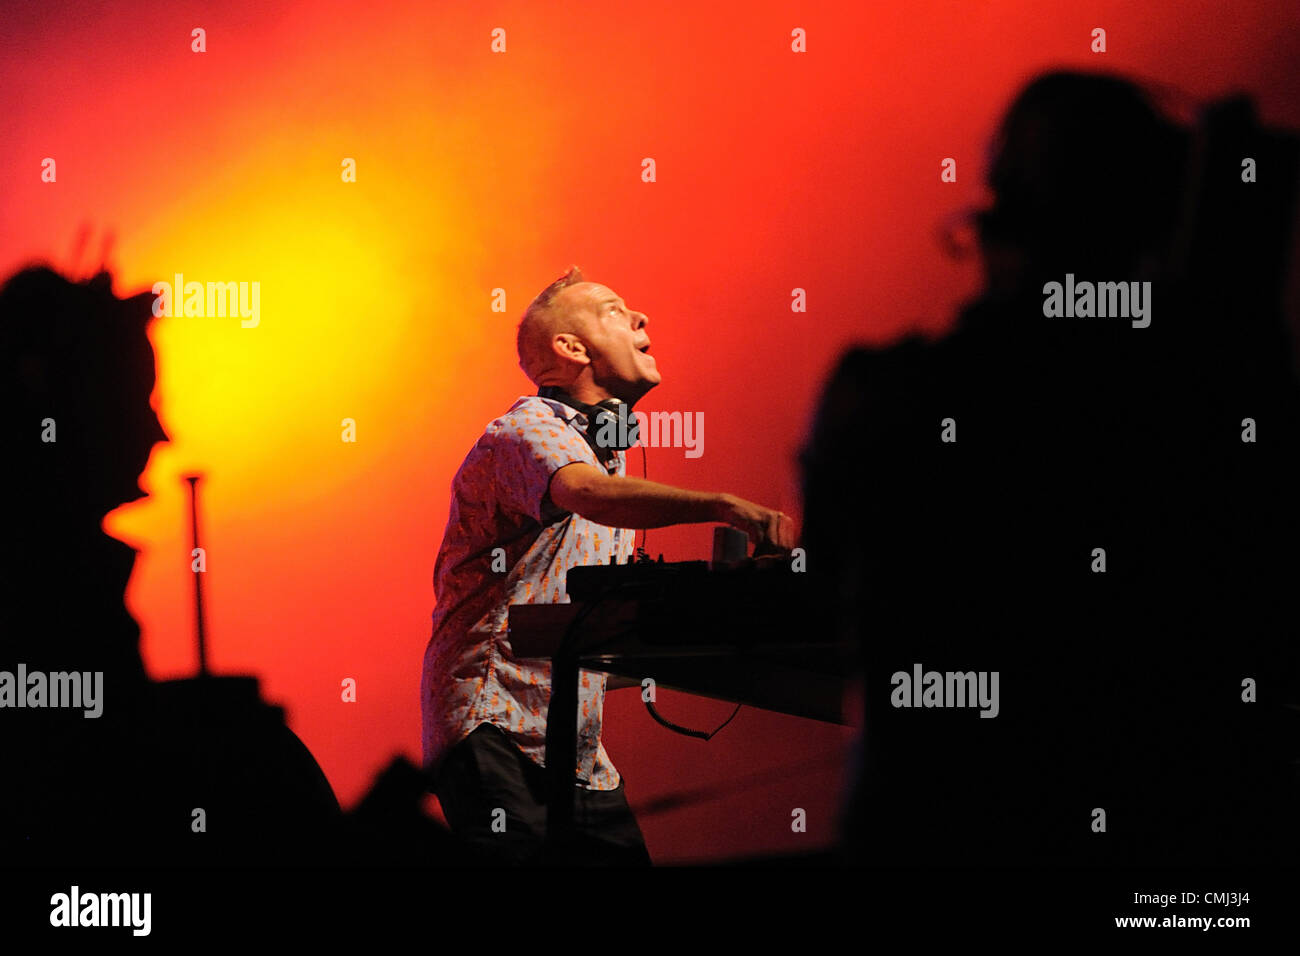 11th Aug 2012. British musician aka Fatboy Slim performed during Open Air Festival at the airport in Panensky Tynec (56 kms north-east from Prague) on August 11, 2012. (CTK Photo/Jan Beranek) Stock Photo